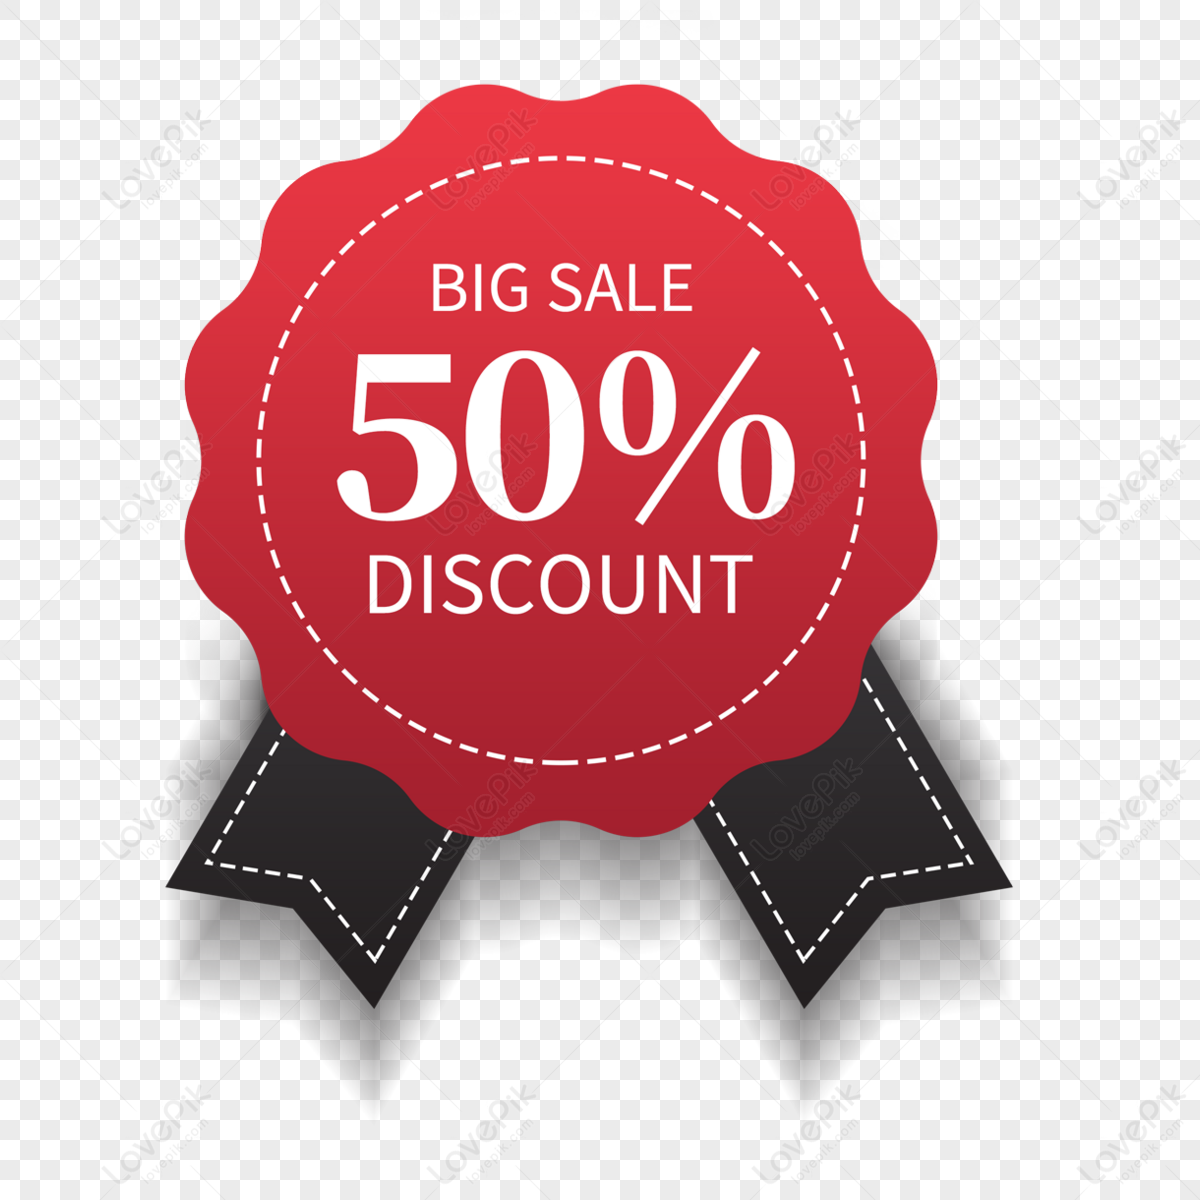 Sale 50 png images | PNGEgg